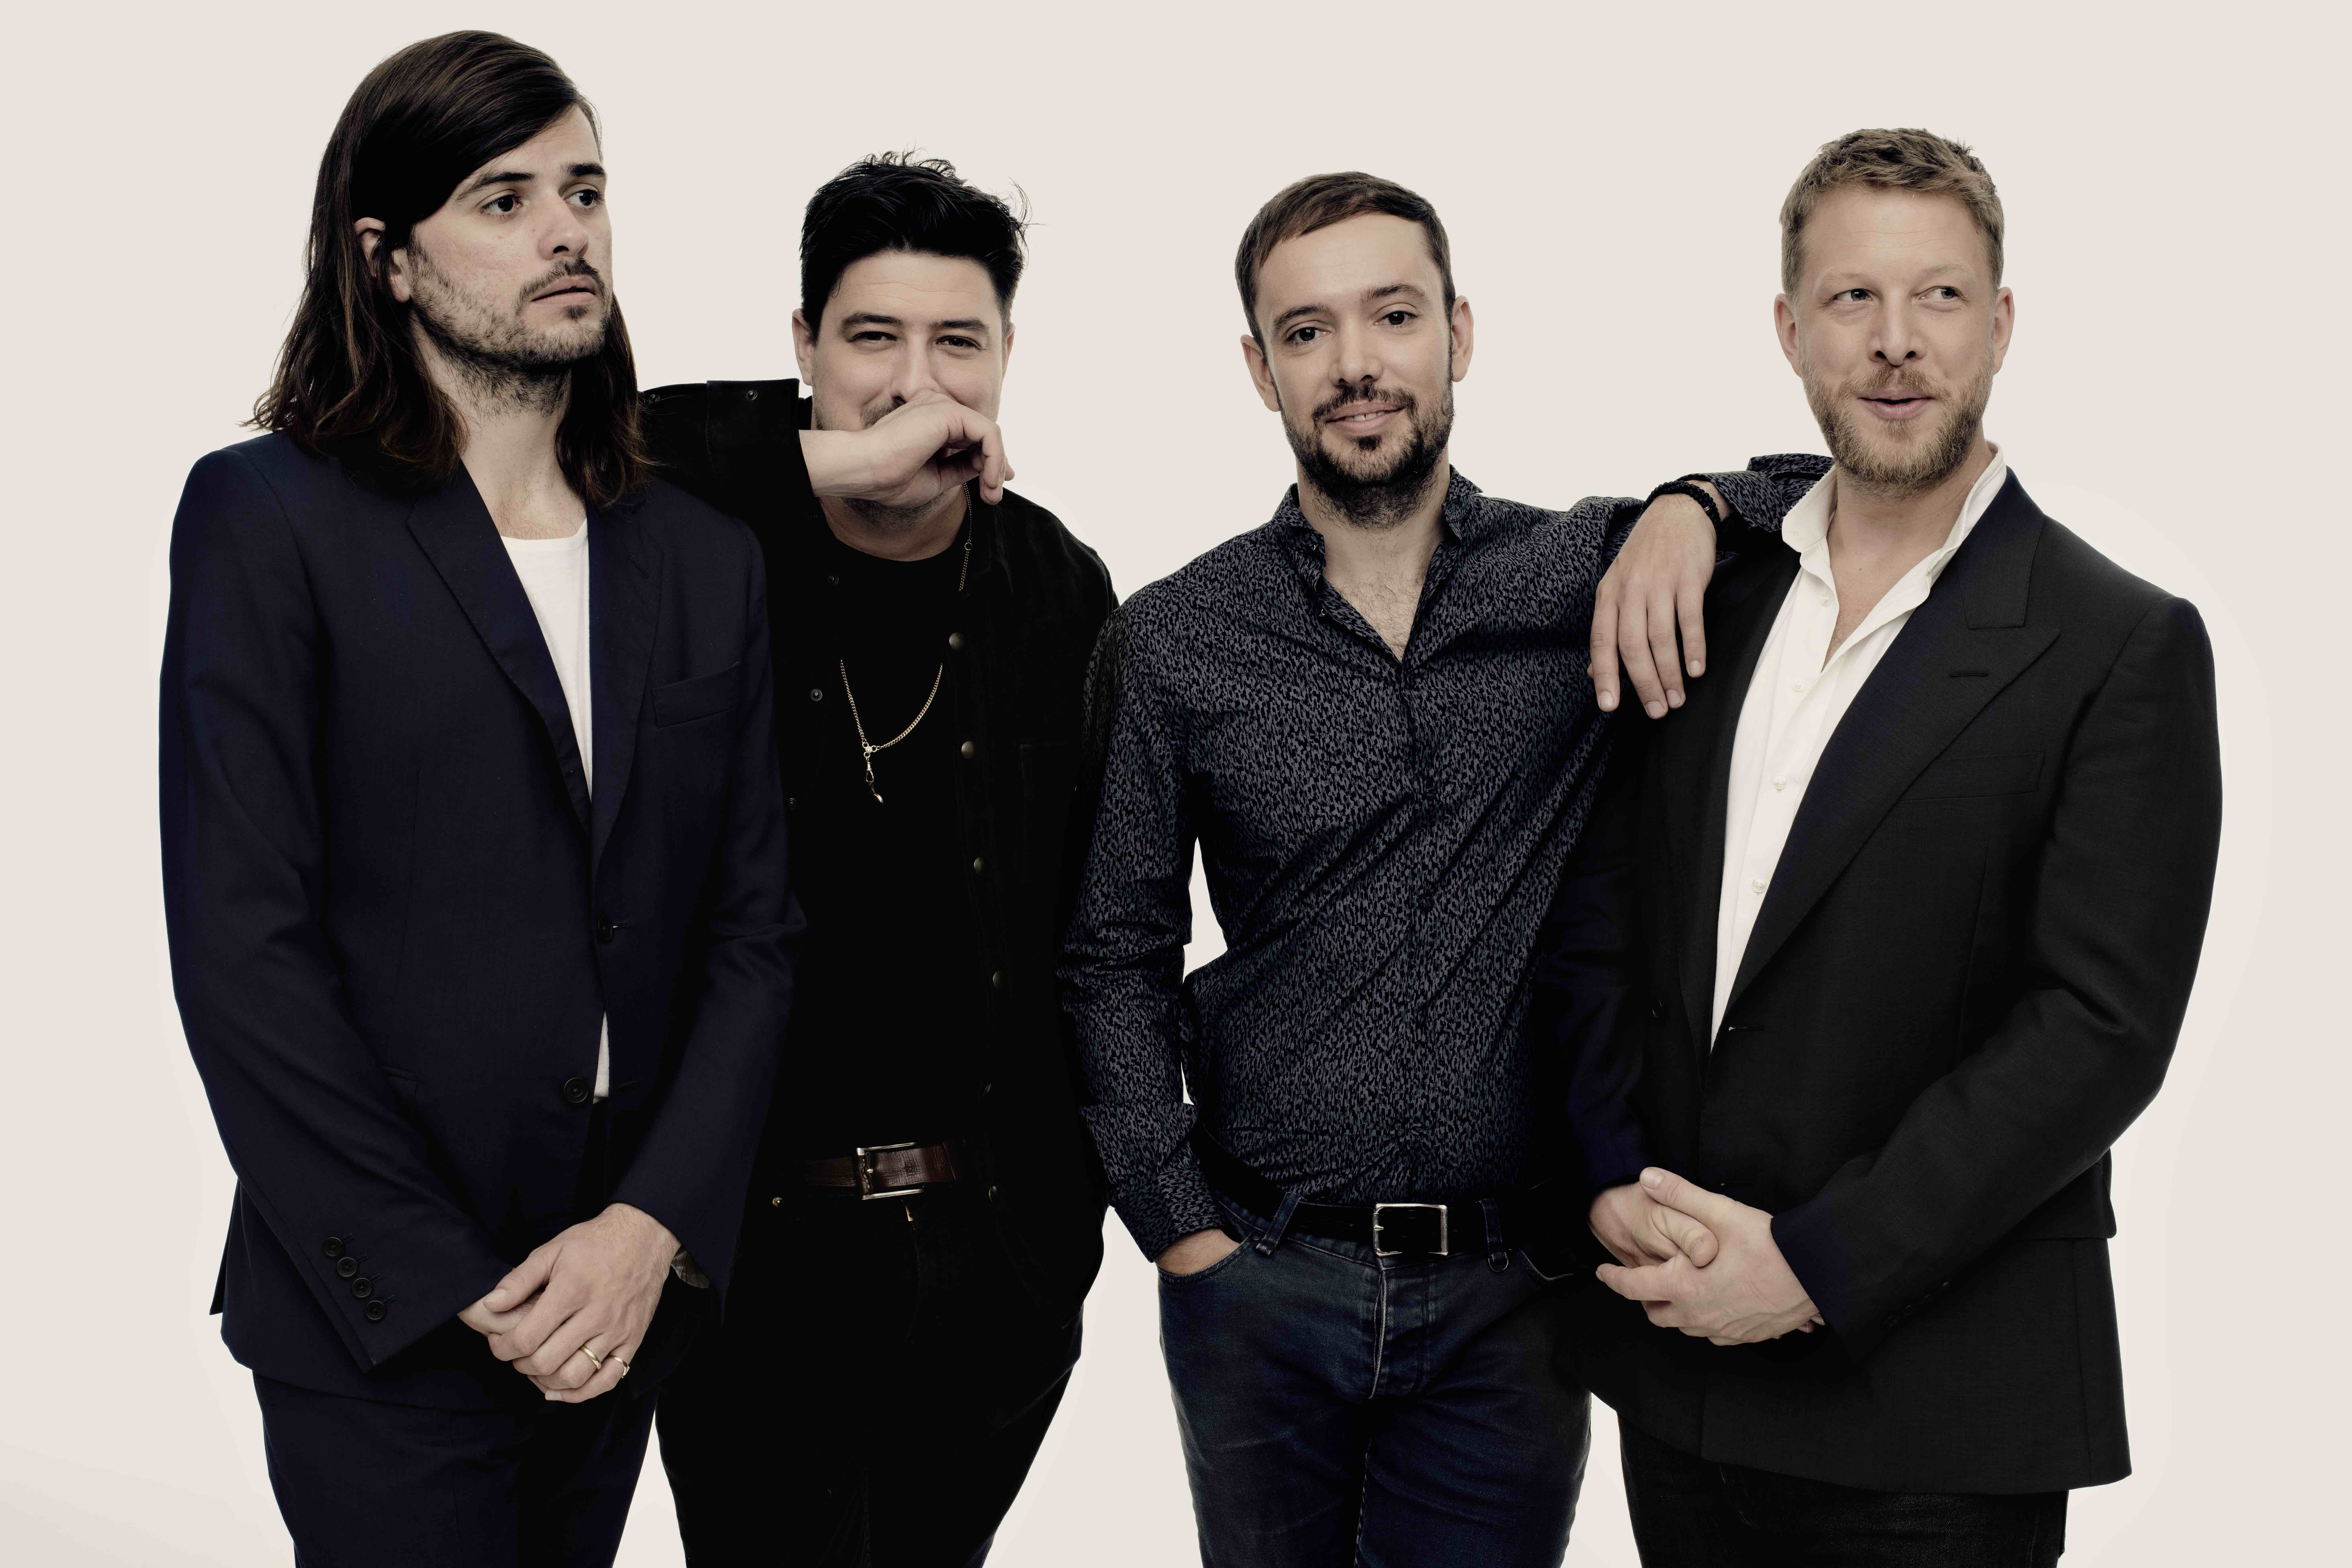 mumford and sons tour america